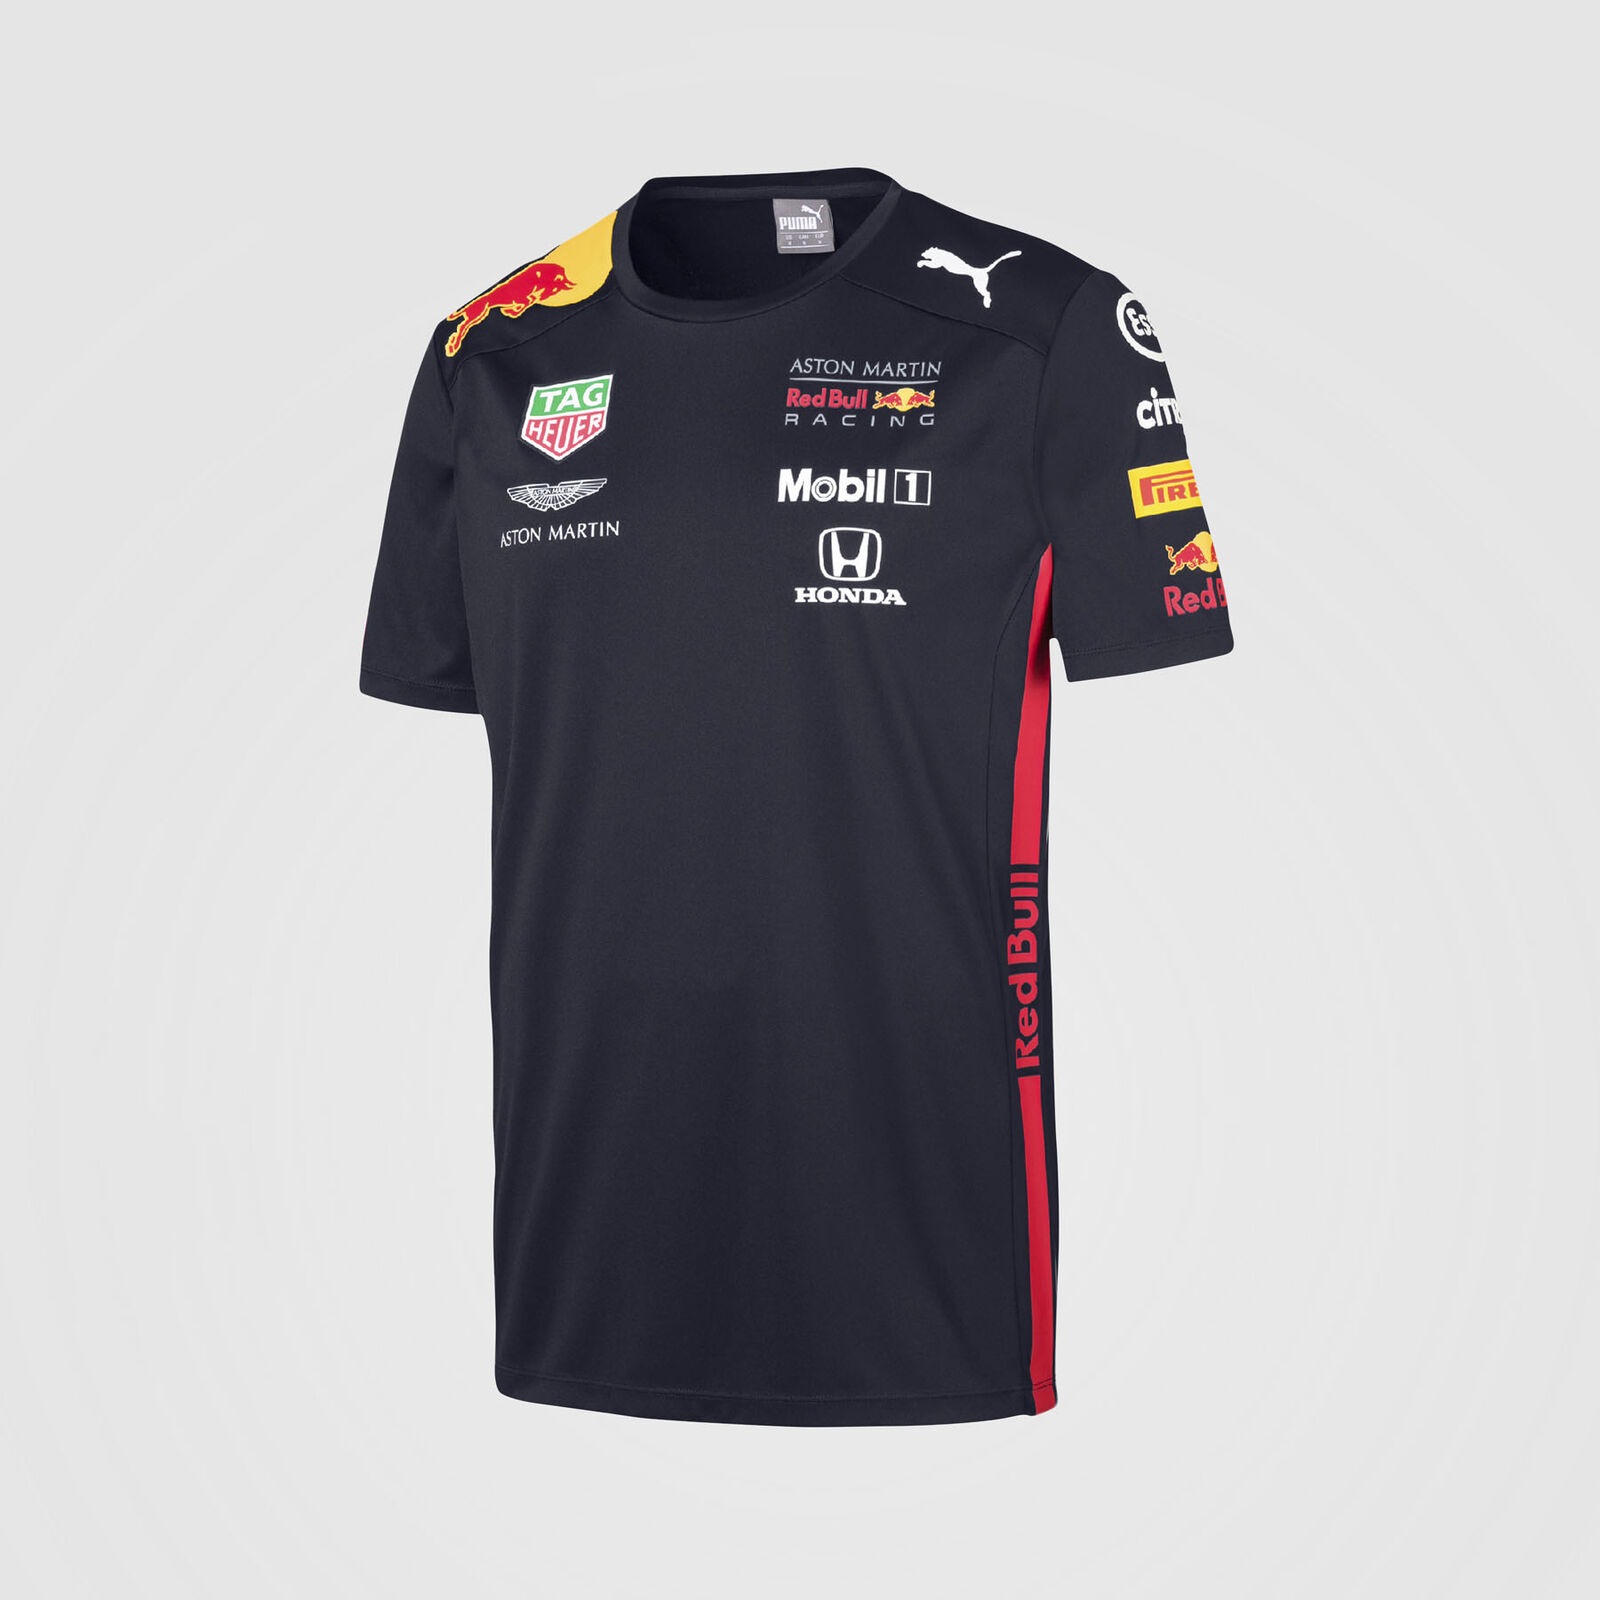 2019 T-Shirt - Red Bull Racing | Fuel For Fans